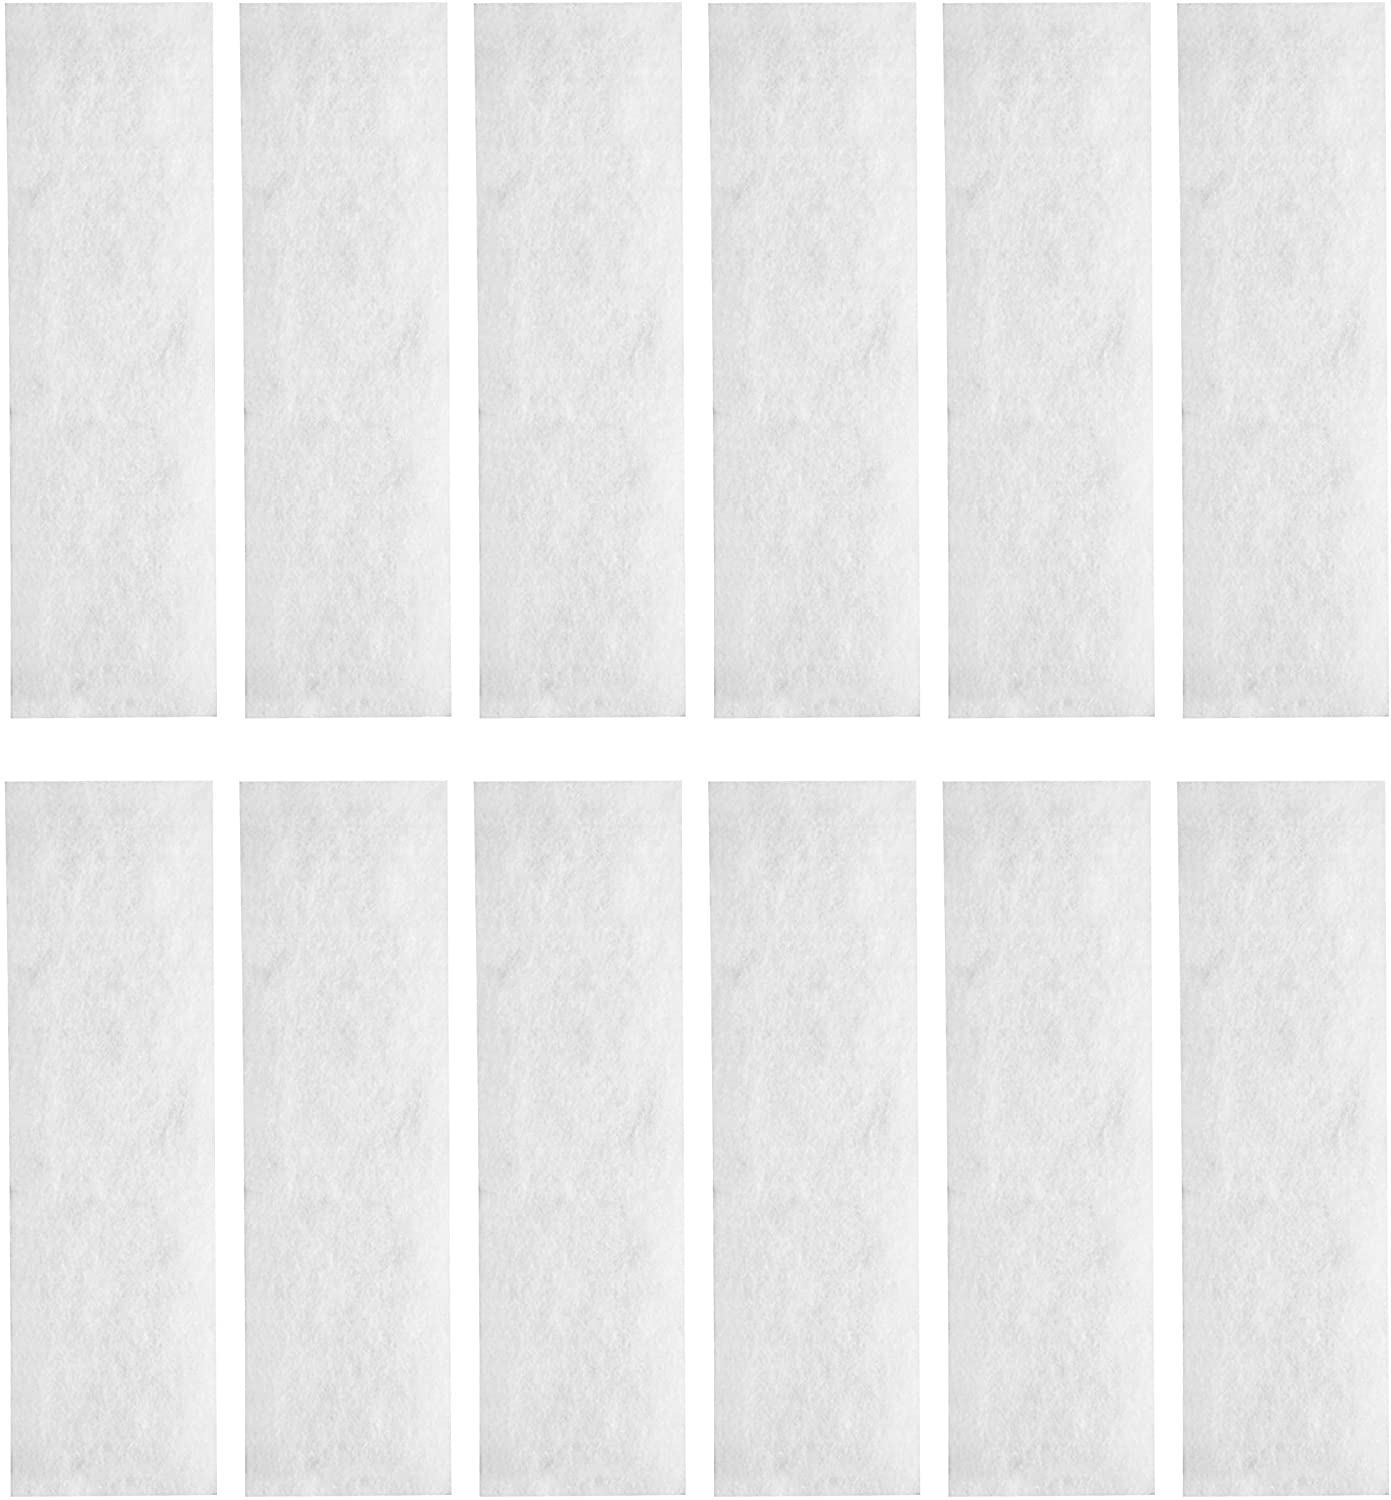 LTWHOME Compatible White Filter Floss Replacement for All Pond Solutions FW-29 Nano Tank (Pack of 12)